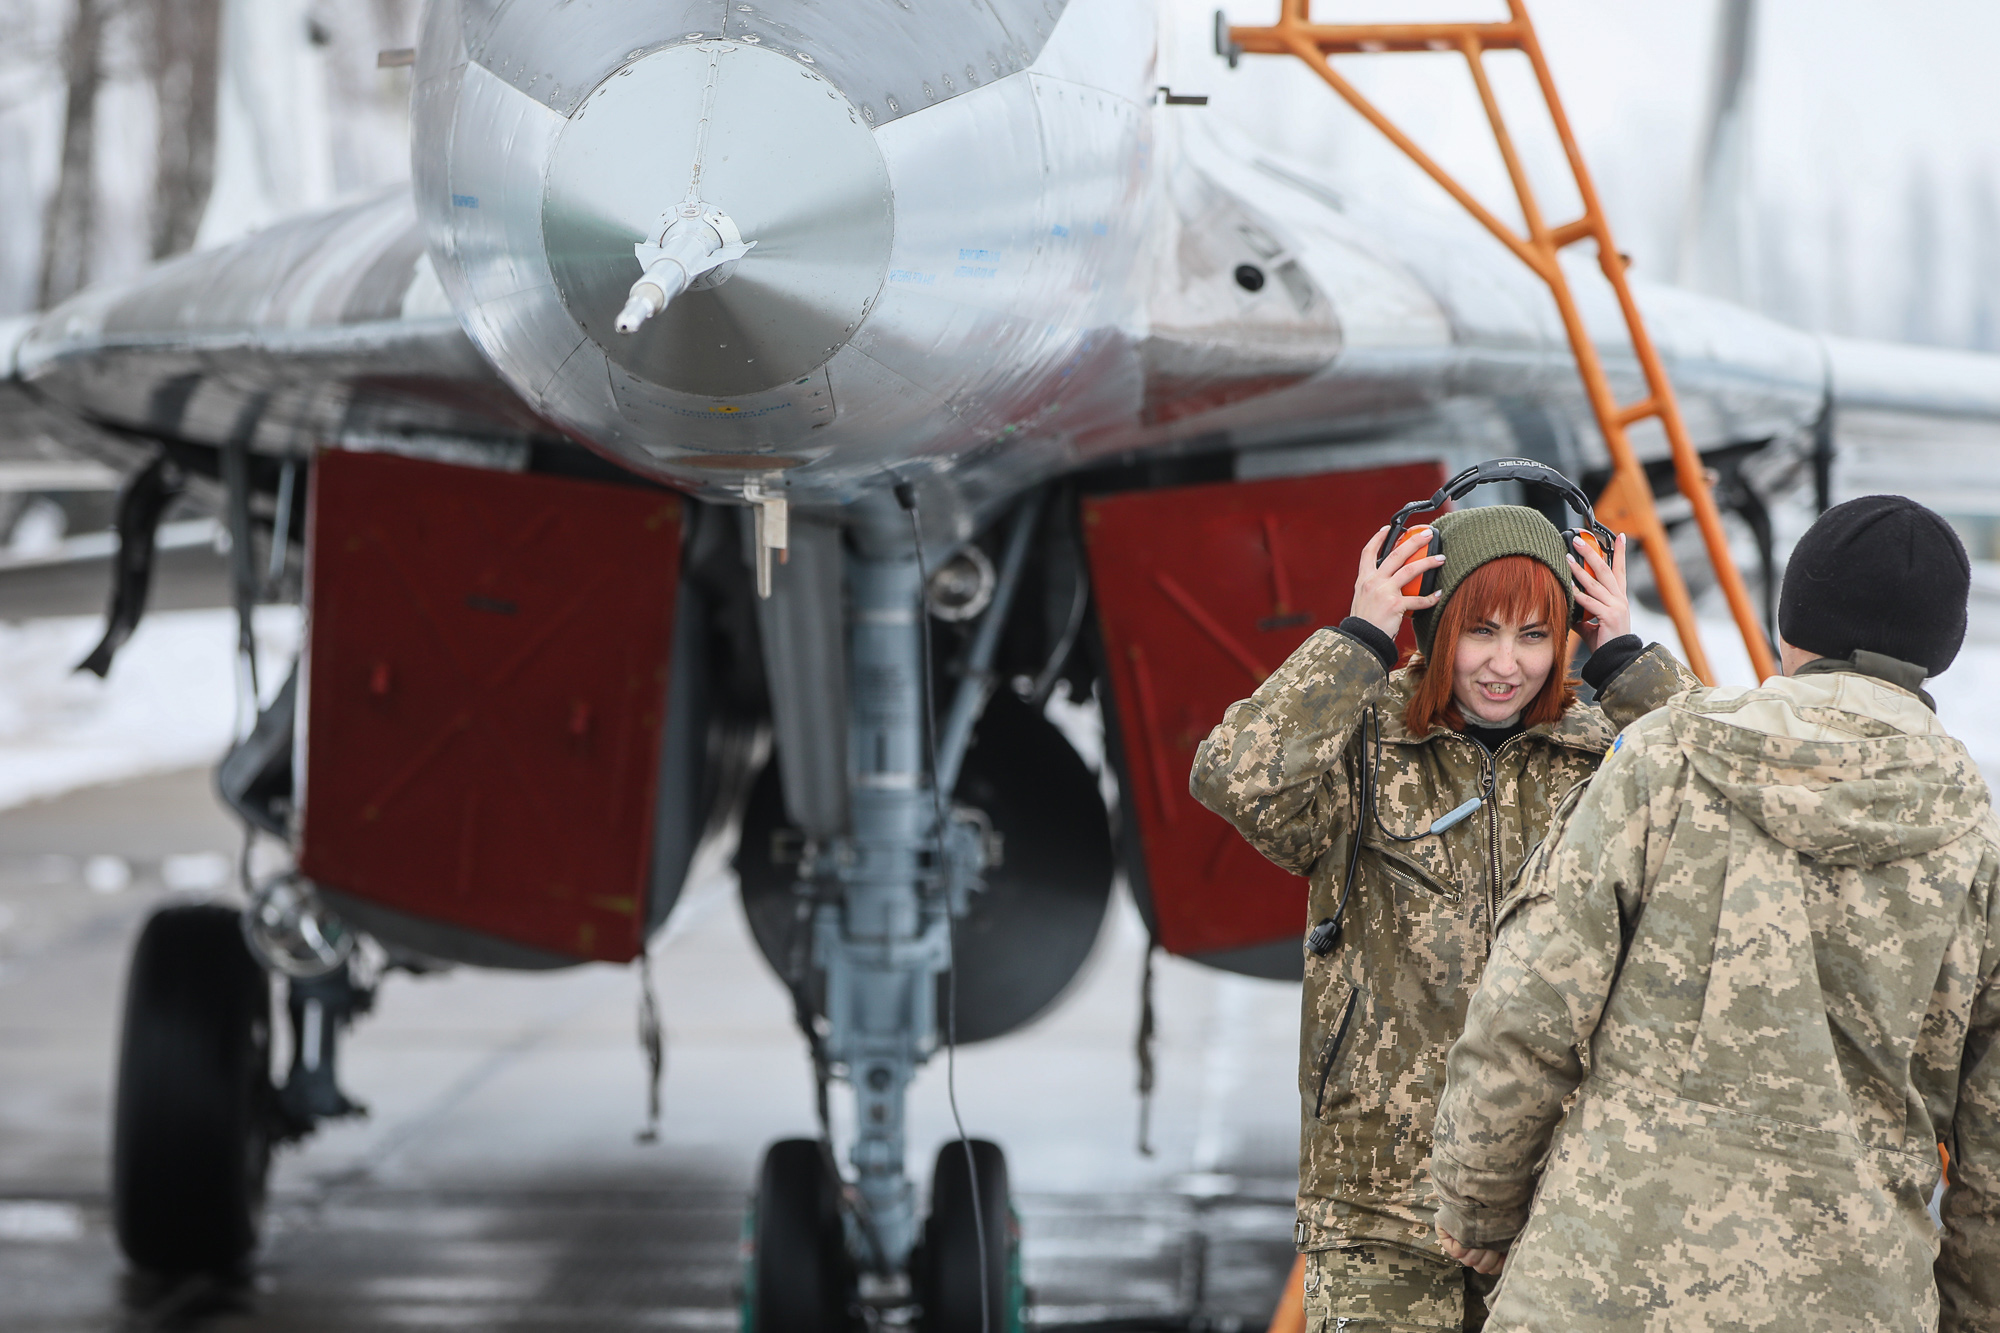 Service technicians prepare a Mikoyan MiG-29 fighter for a practice flight at Repair technicians inspect a Ukrainian Air Force&#8217;s L-39 Albatros training plane at an airbase of Vasylkiv on Feb. 14, 2019.